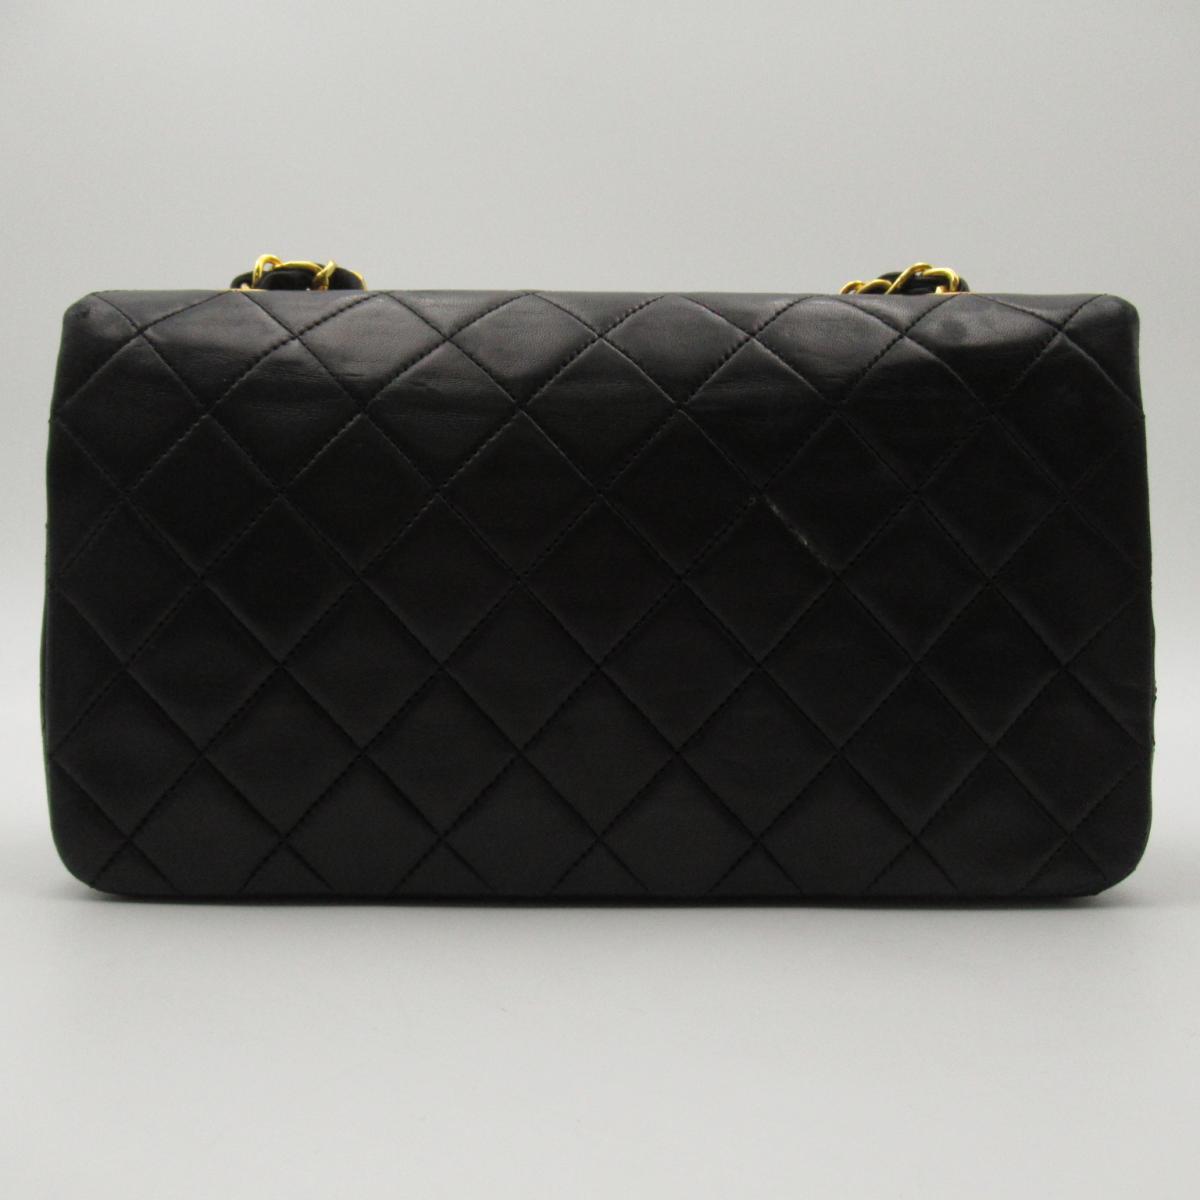 CC Quilted Single Full Flap Bag